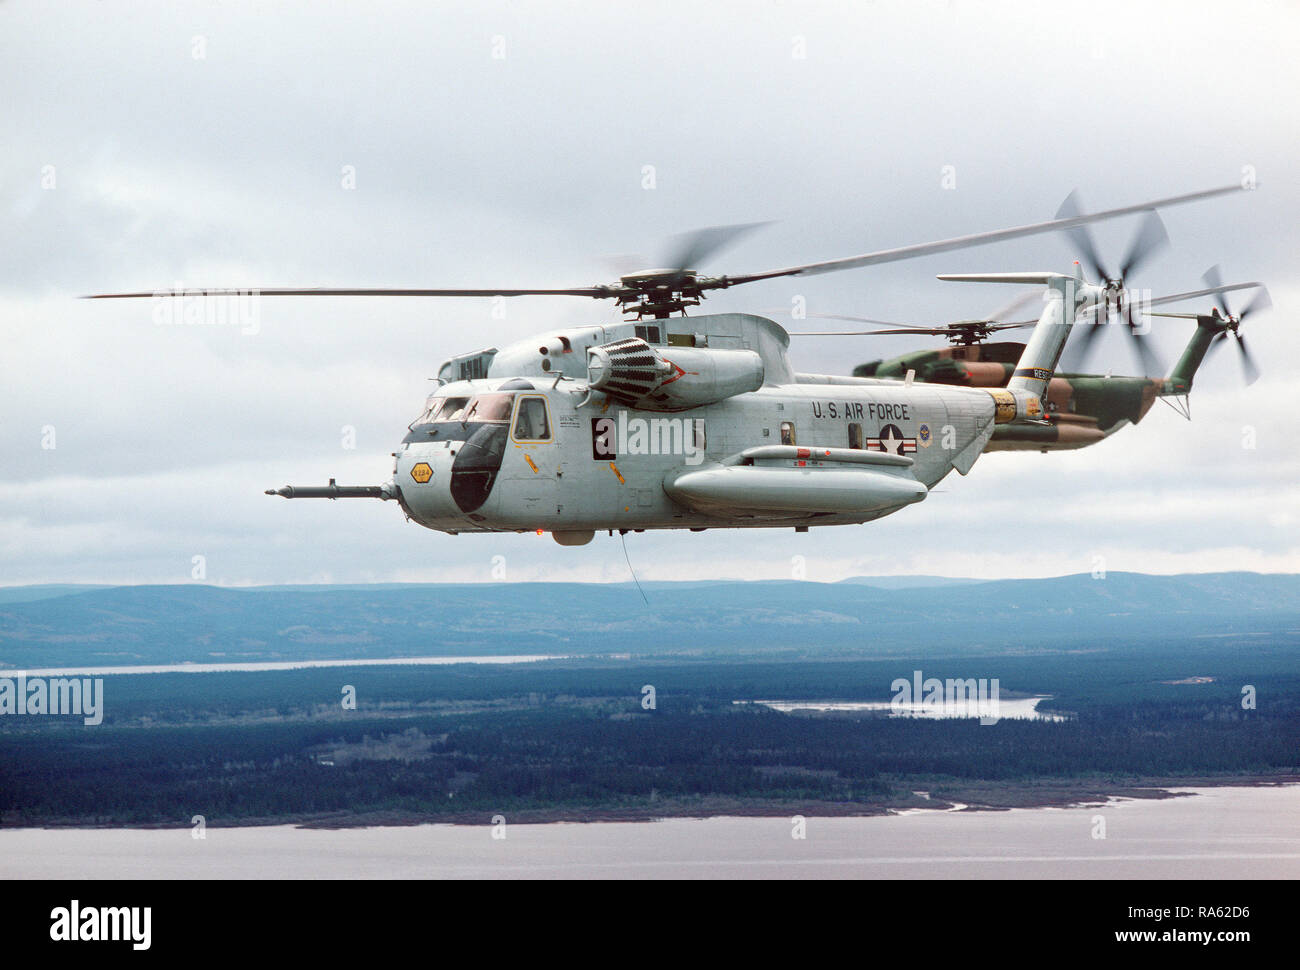 1978 - An air-to-air left side view of two 39th Aerospace Rescue and Recovery Wing HH-53 helicopters over Goose Bay while en route from Eglin Air Force Base, Florida, to Woodbridge, England. Stock Photo